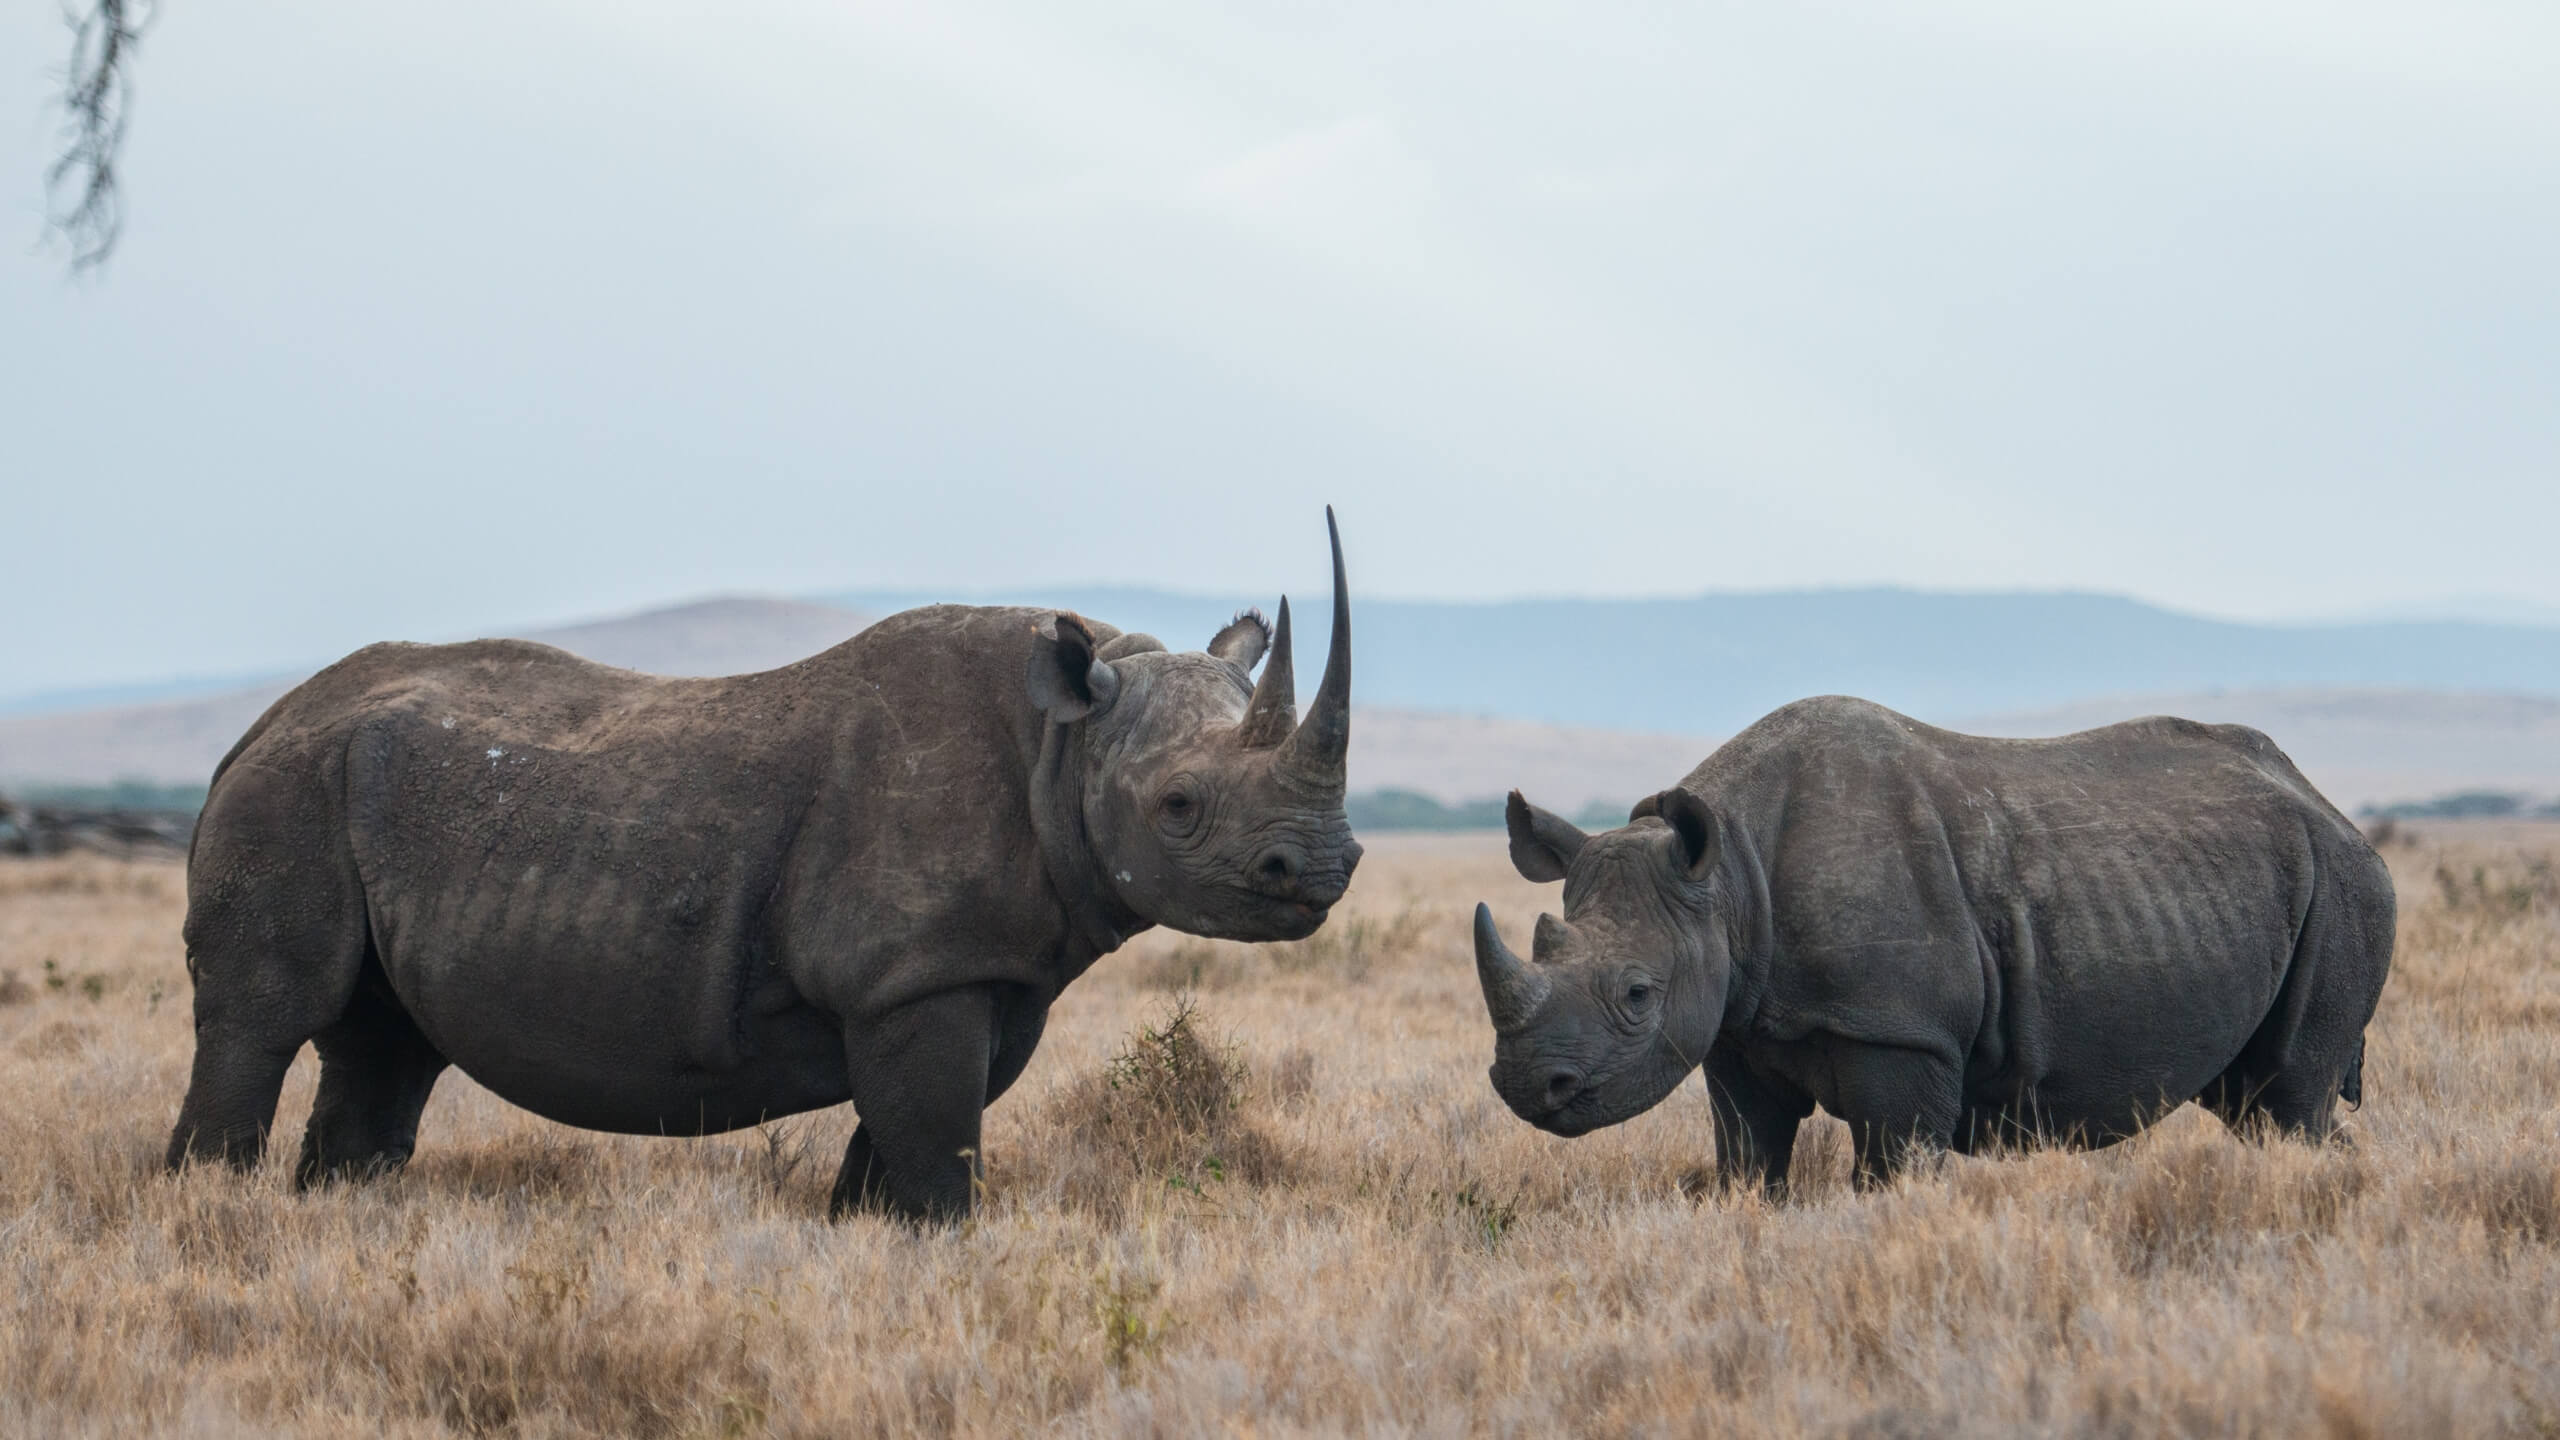 Rhinos have been around us for millions of years to play an important role in shaping the African landscape by consuming a large amount of vegetation.